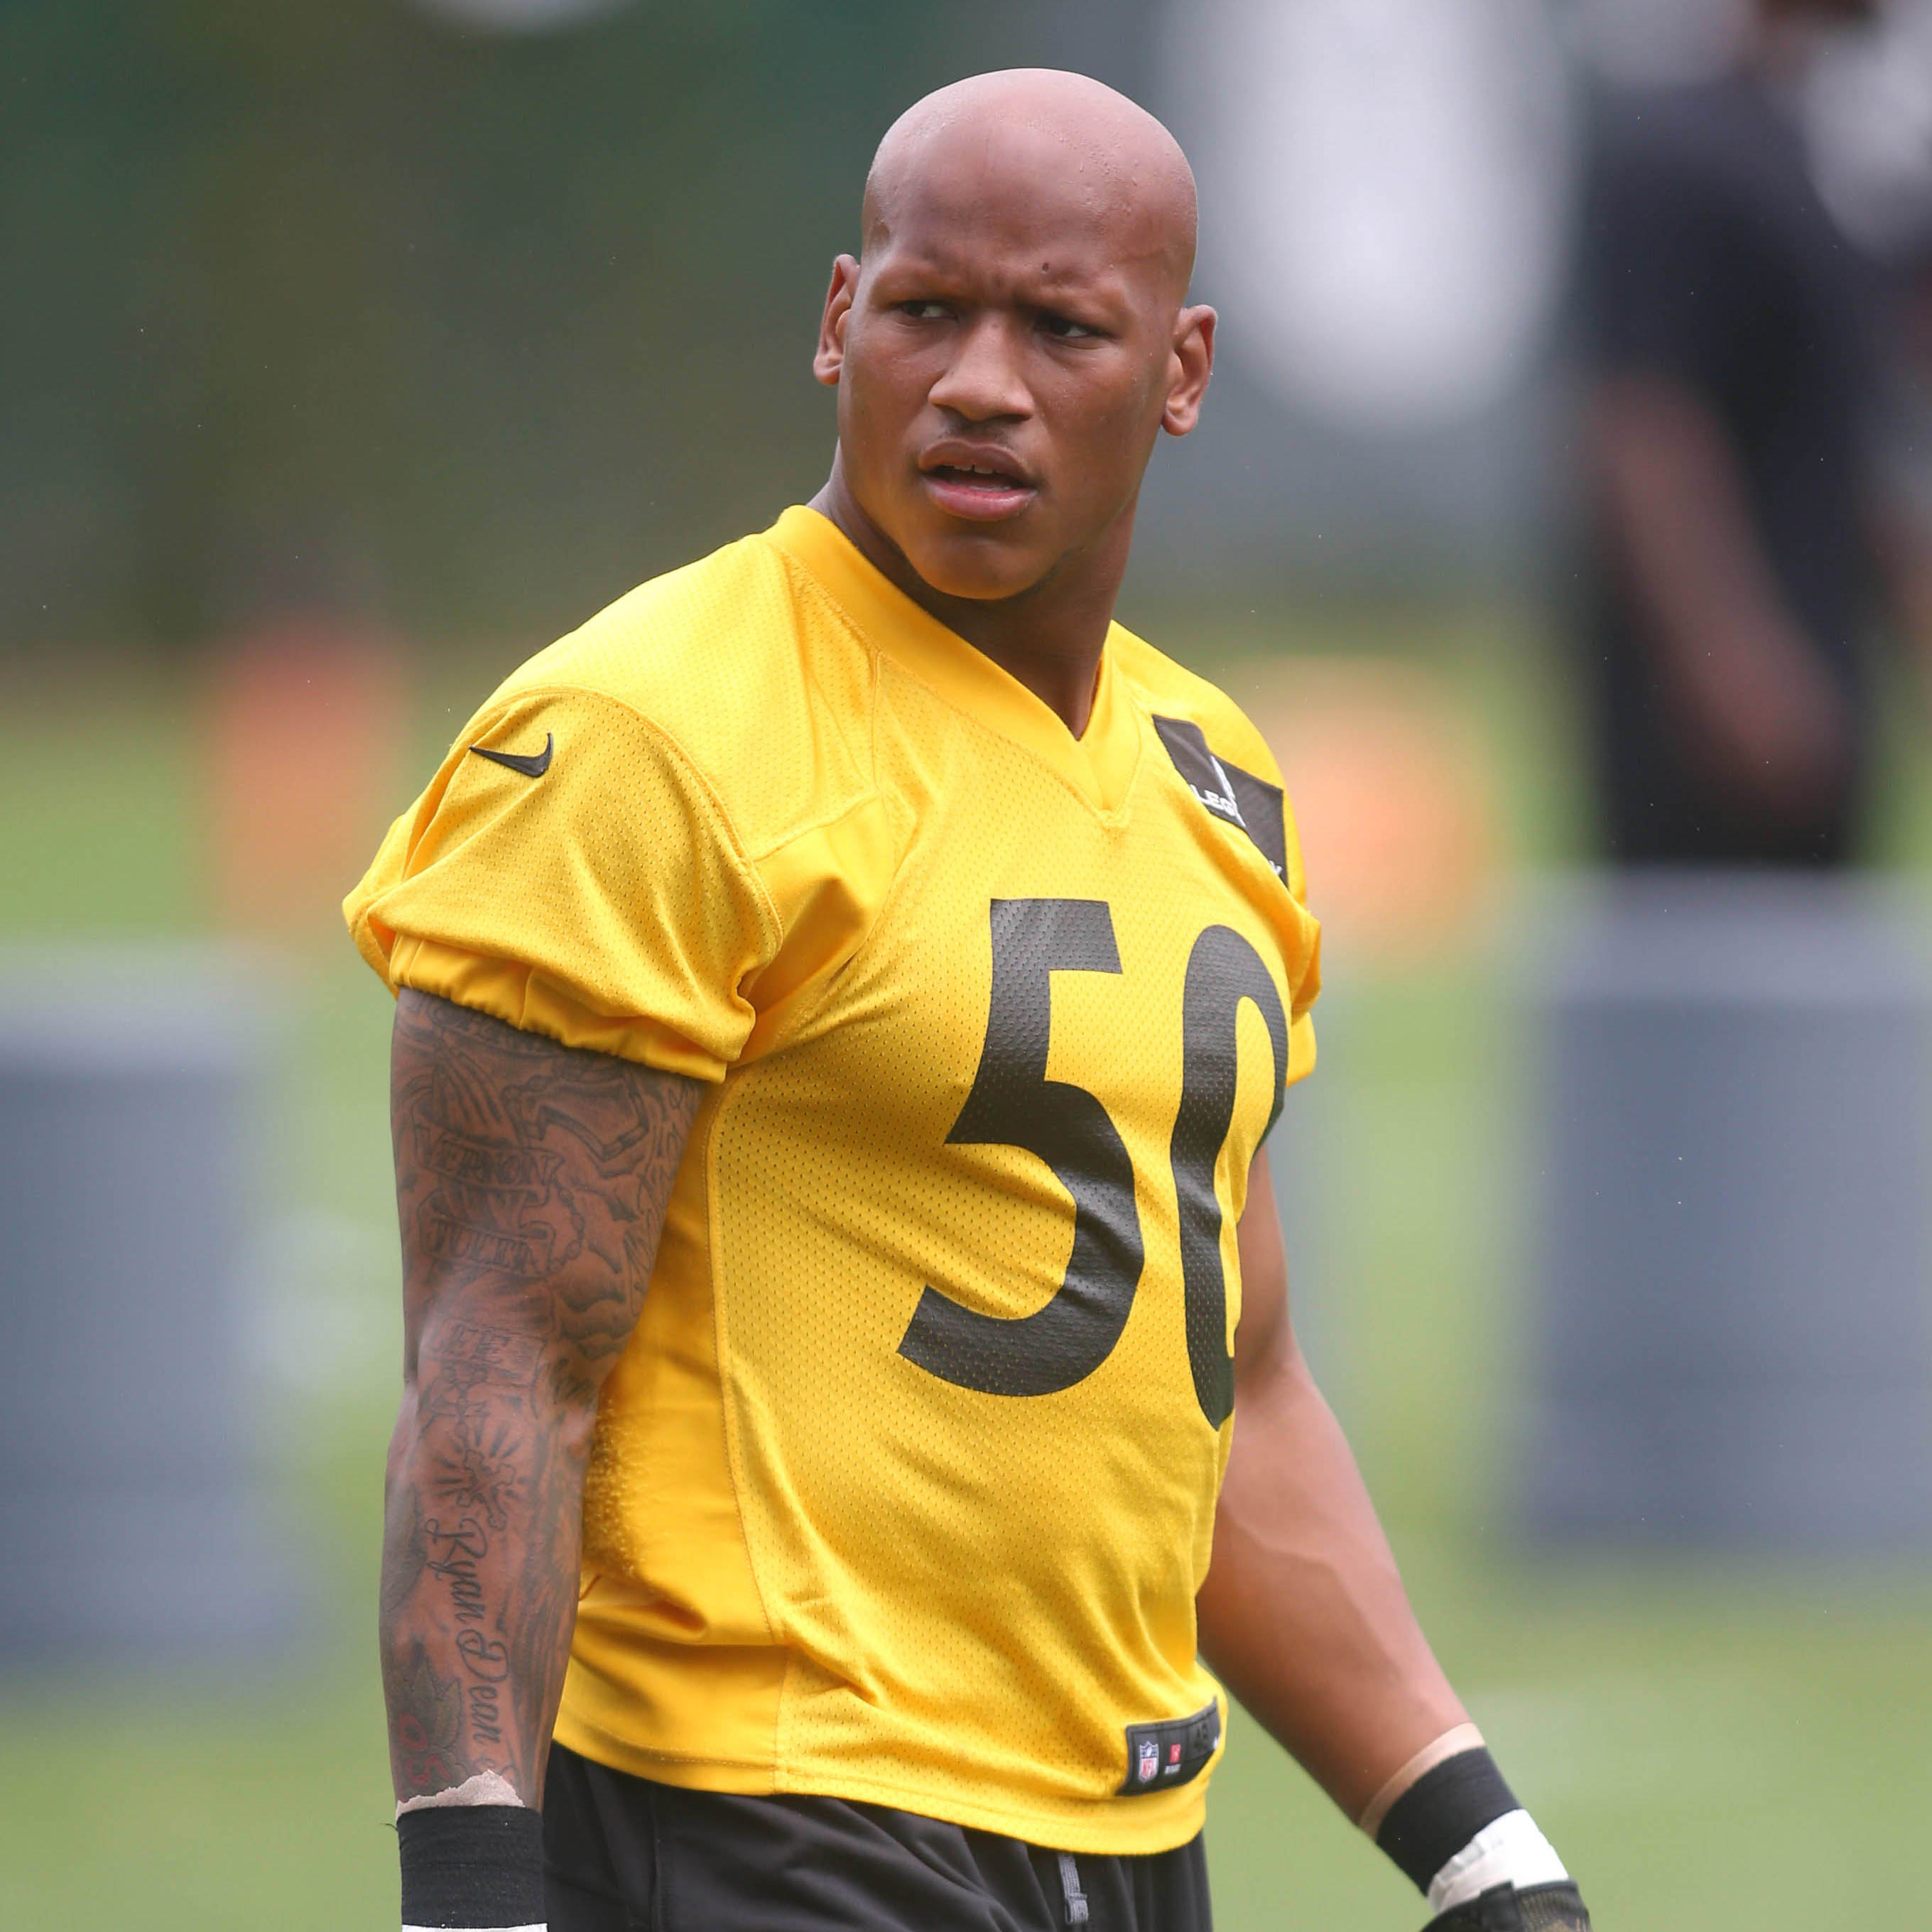 An open letter to Steelers LB Ryan Shazier